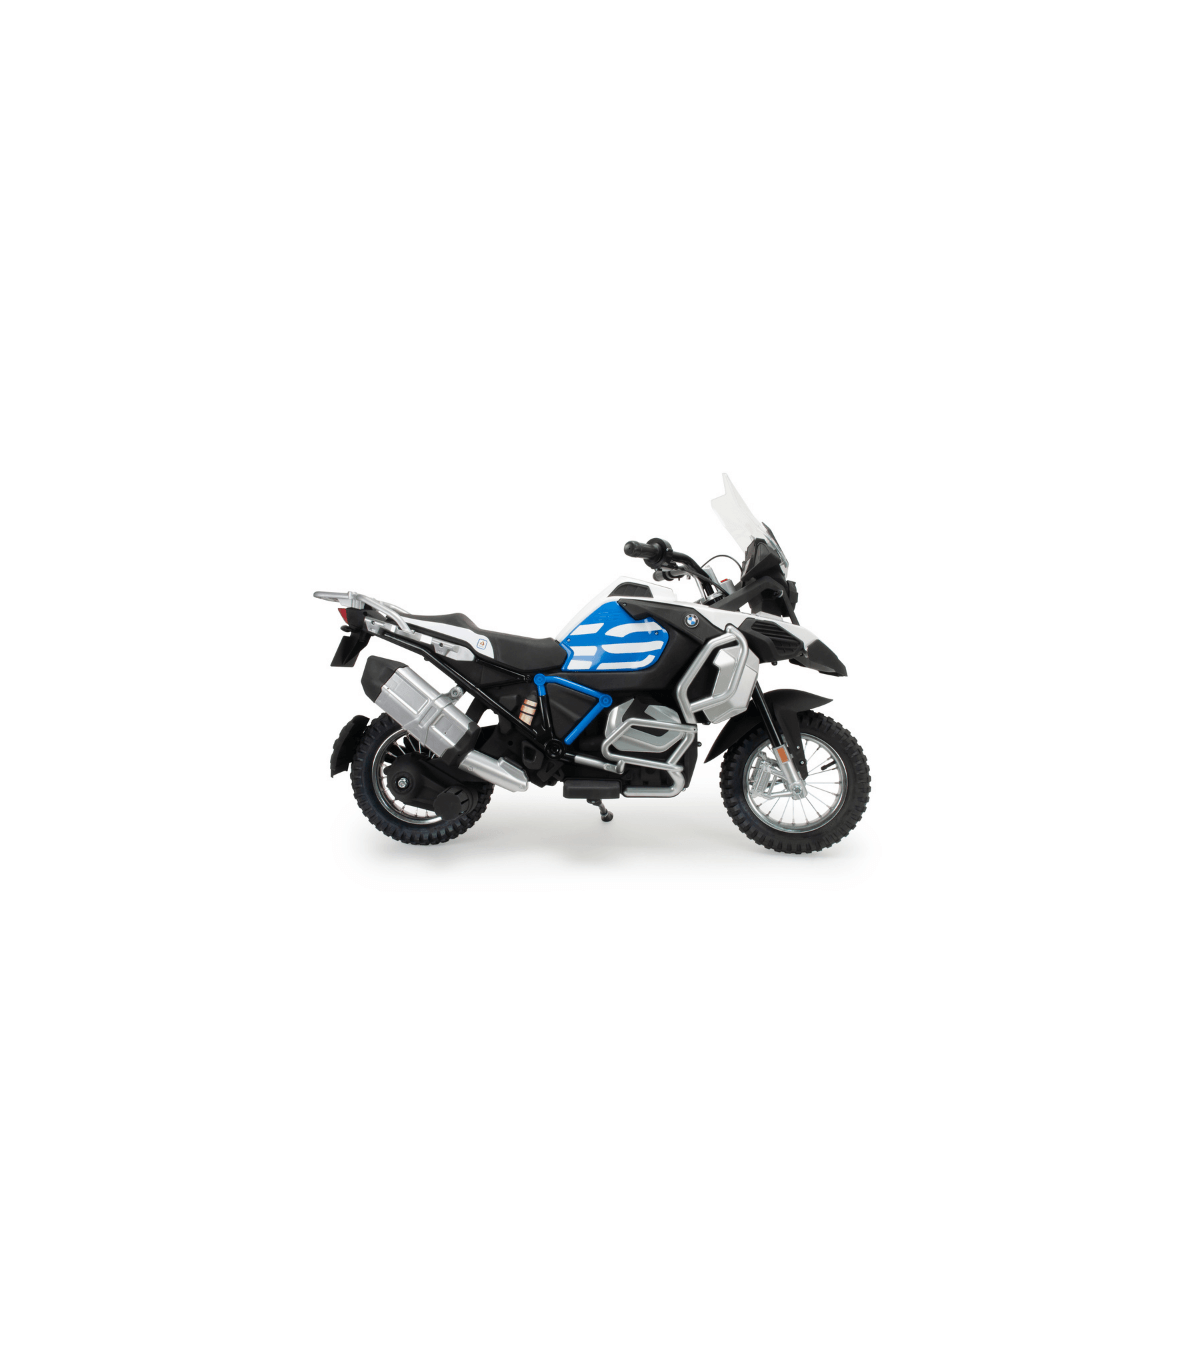 BMW R1250 GS Adventure 24V Motorbike for Children 6 to 10 Years Old